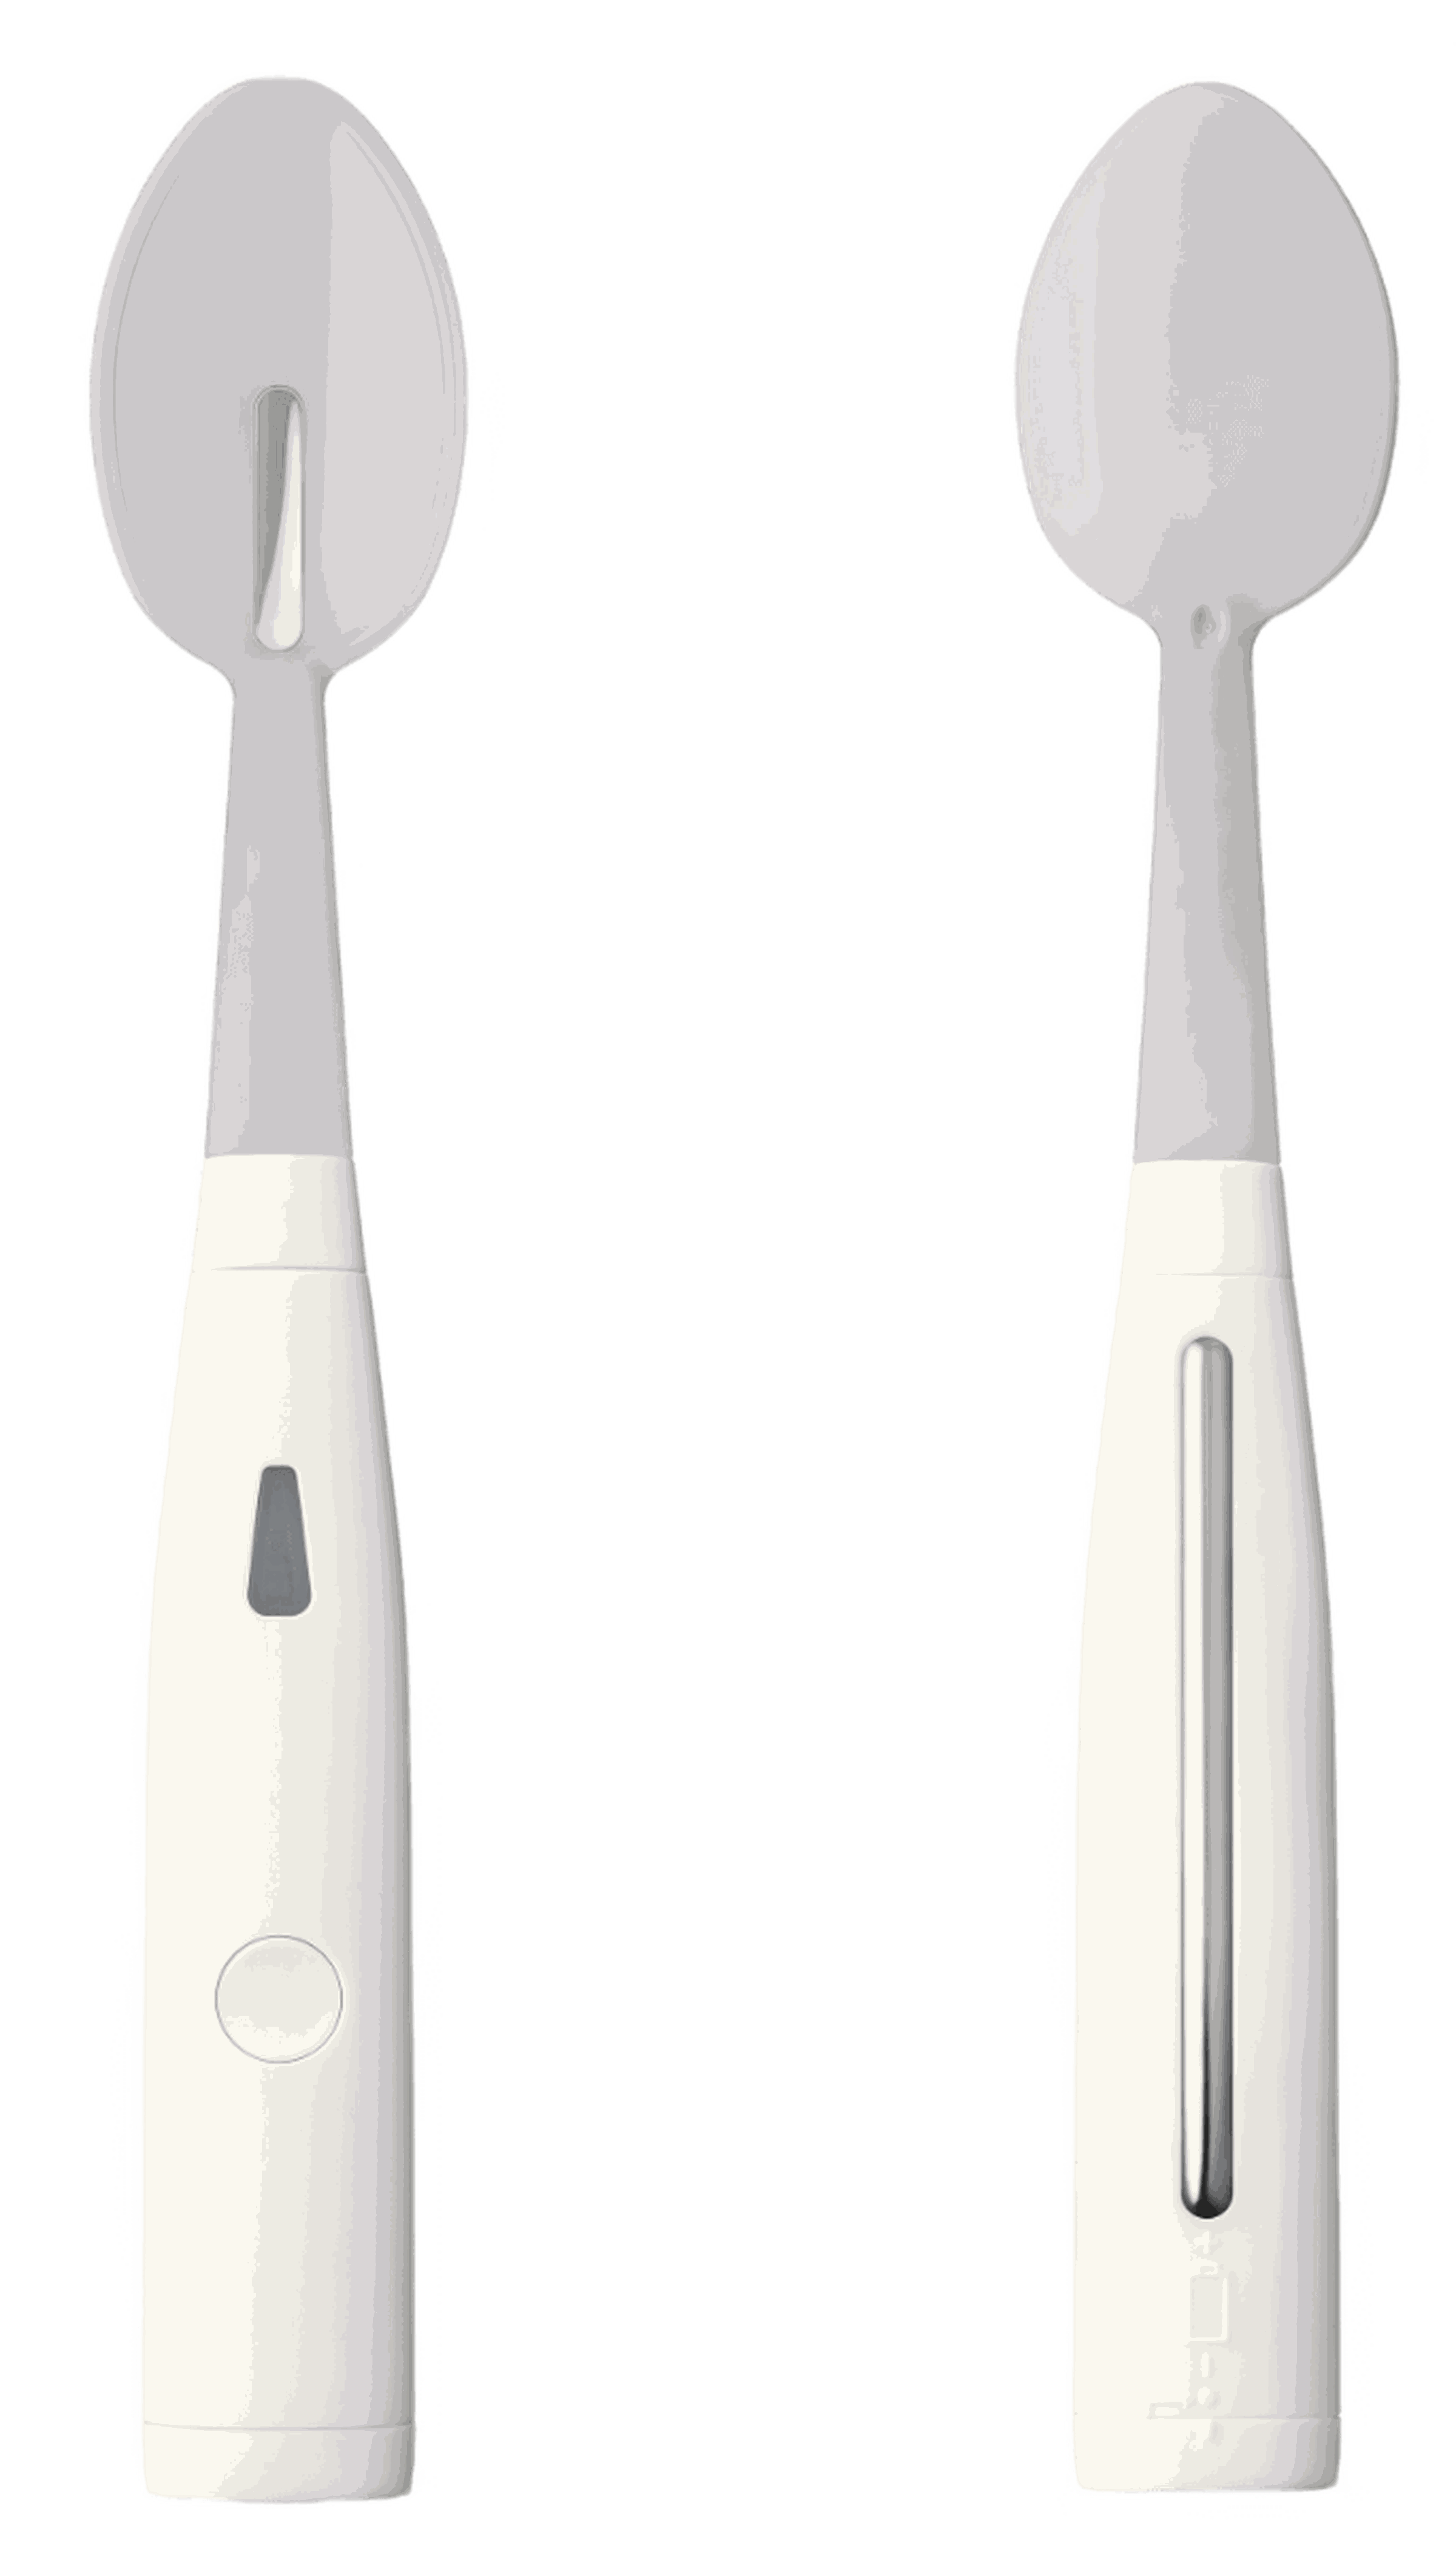 A picture of the top and bottom of the Kirin Electric Salt Spoon.